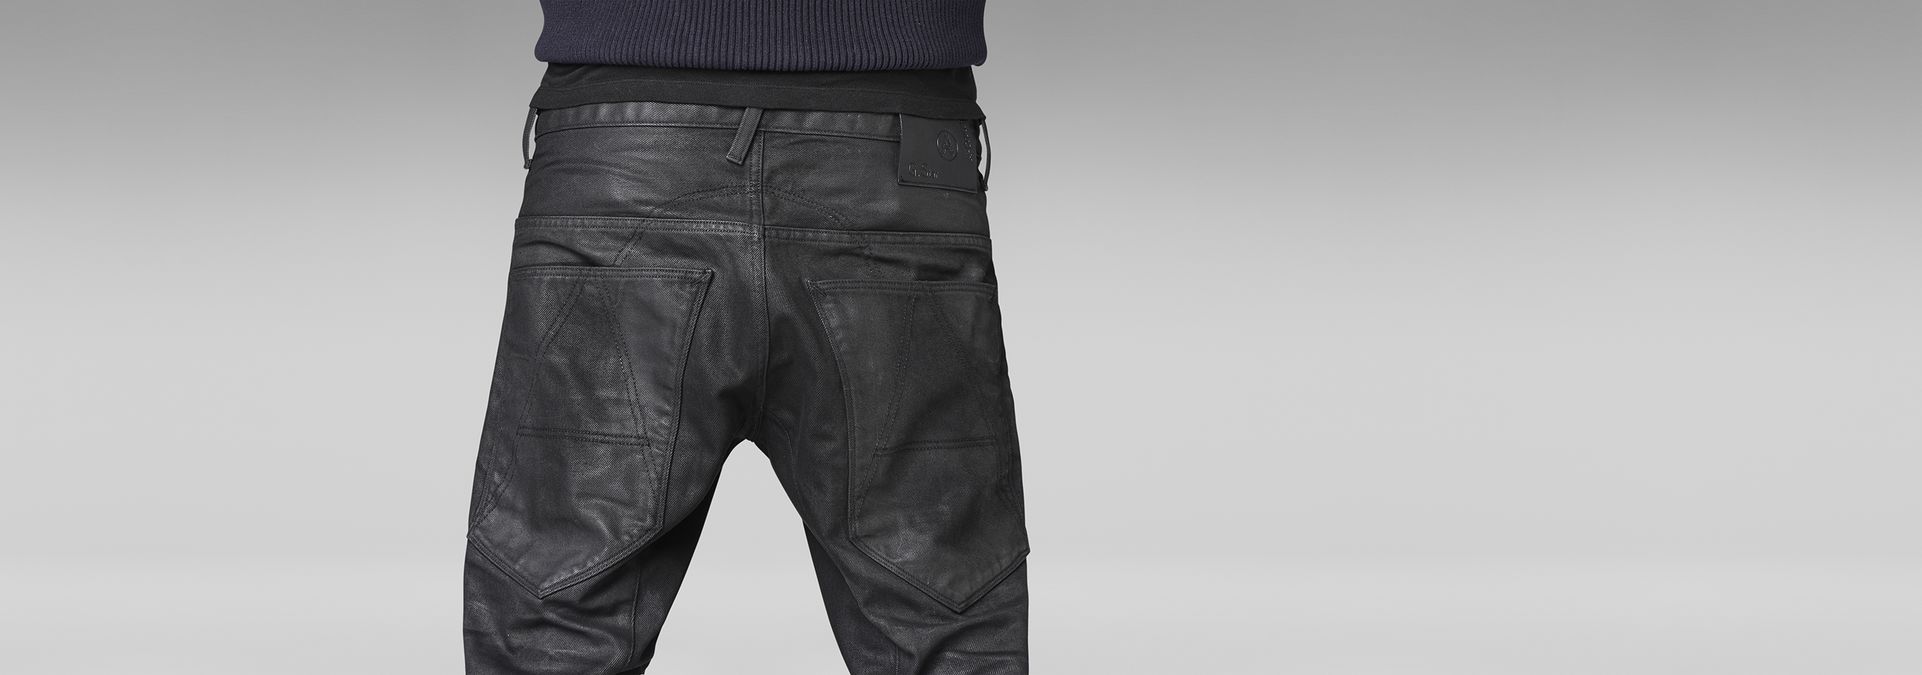 A Crotch Tapered Jeans | Cobler Smash 